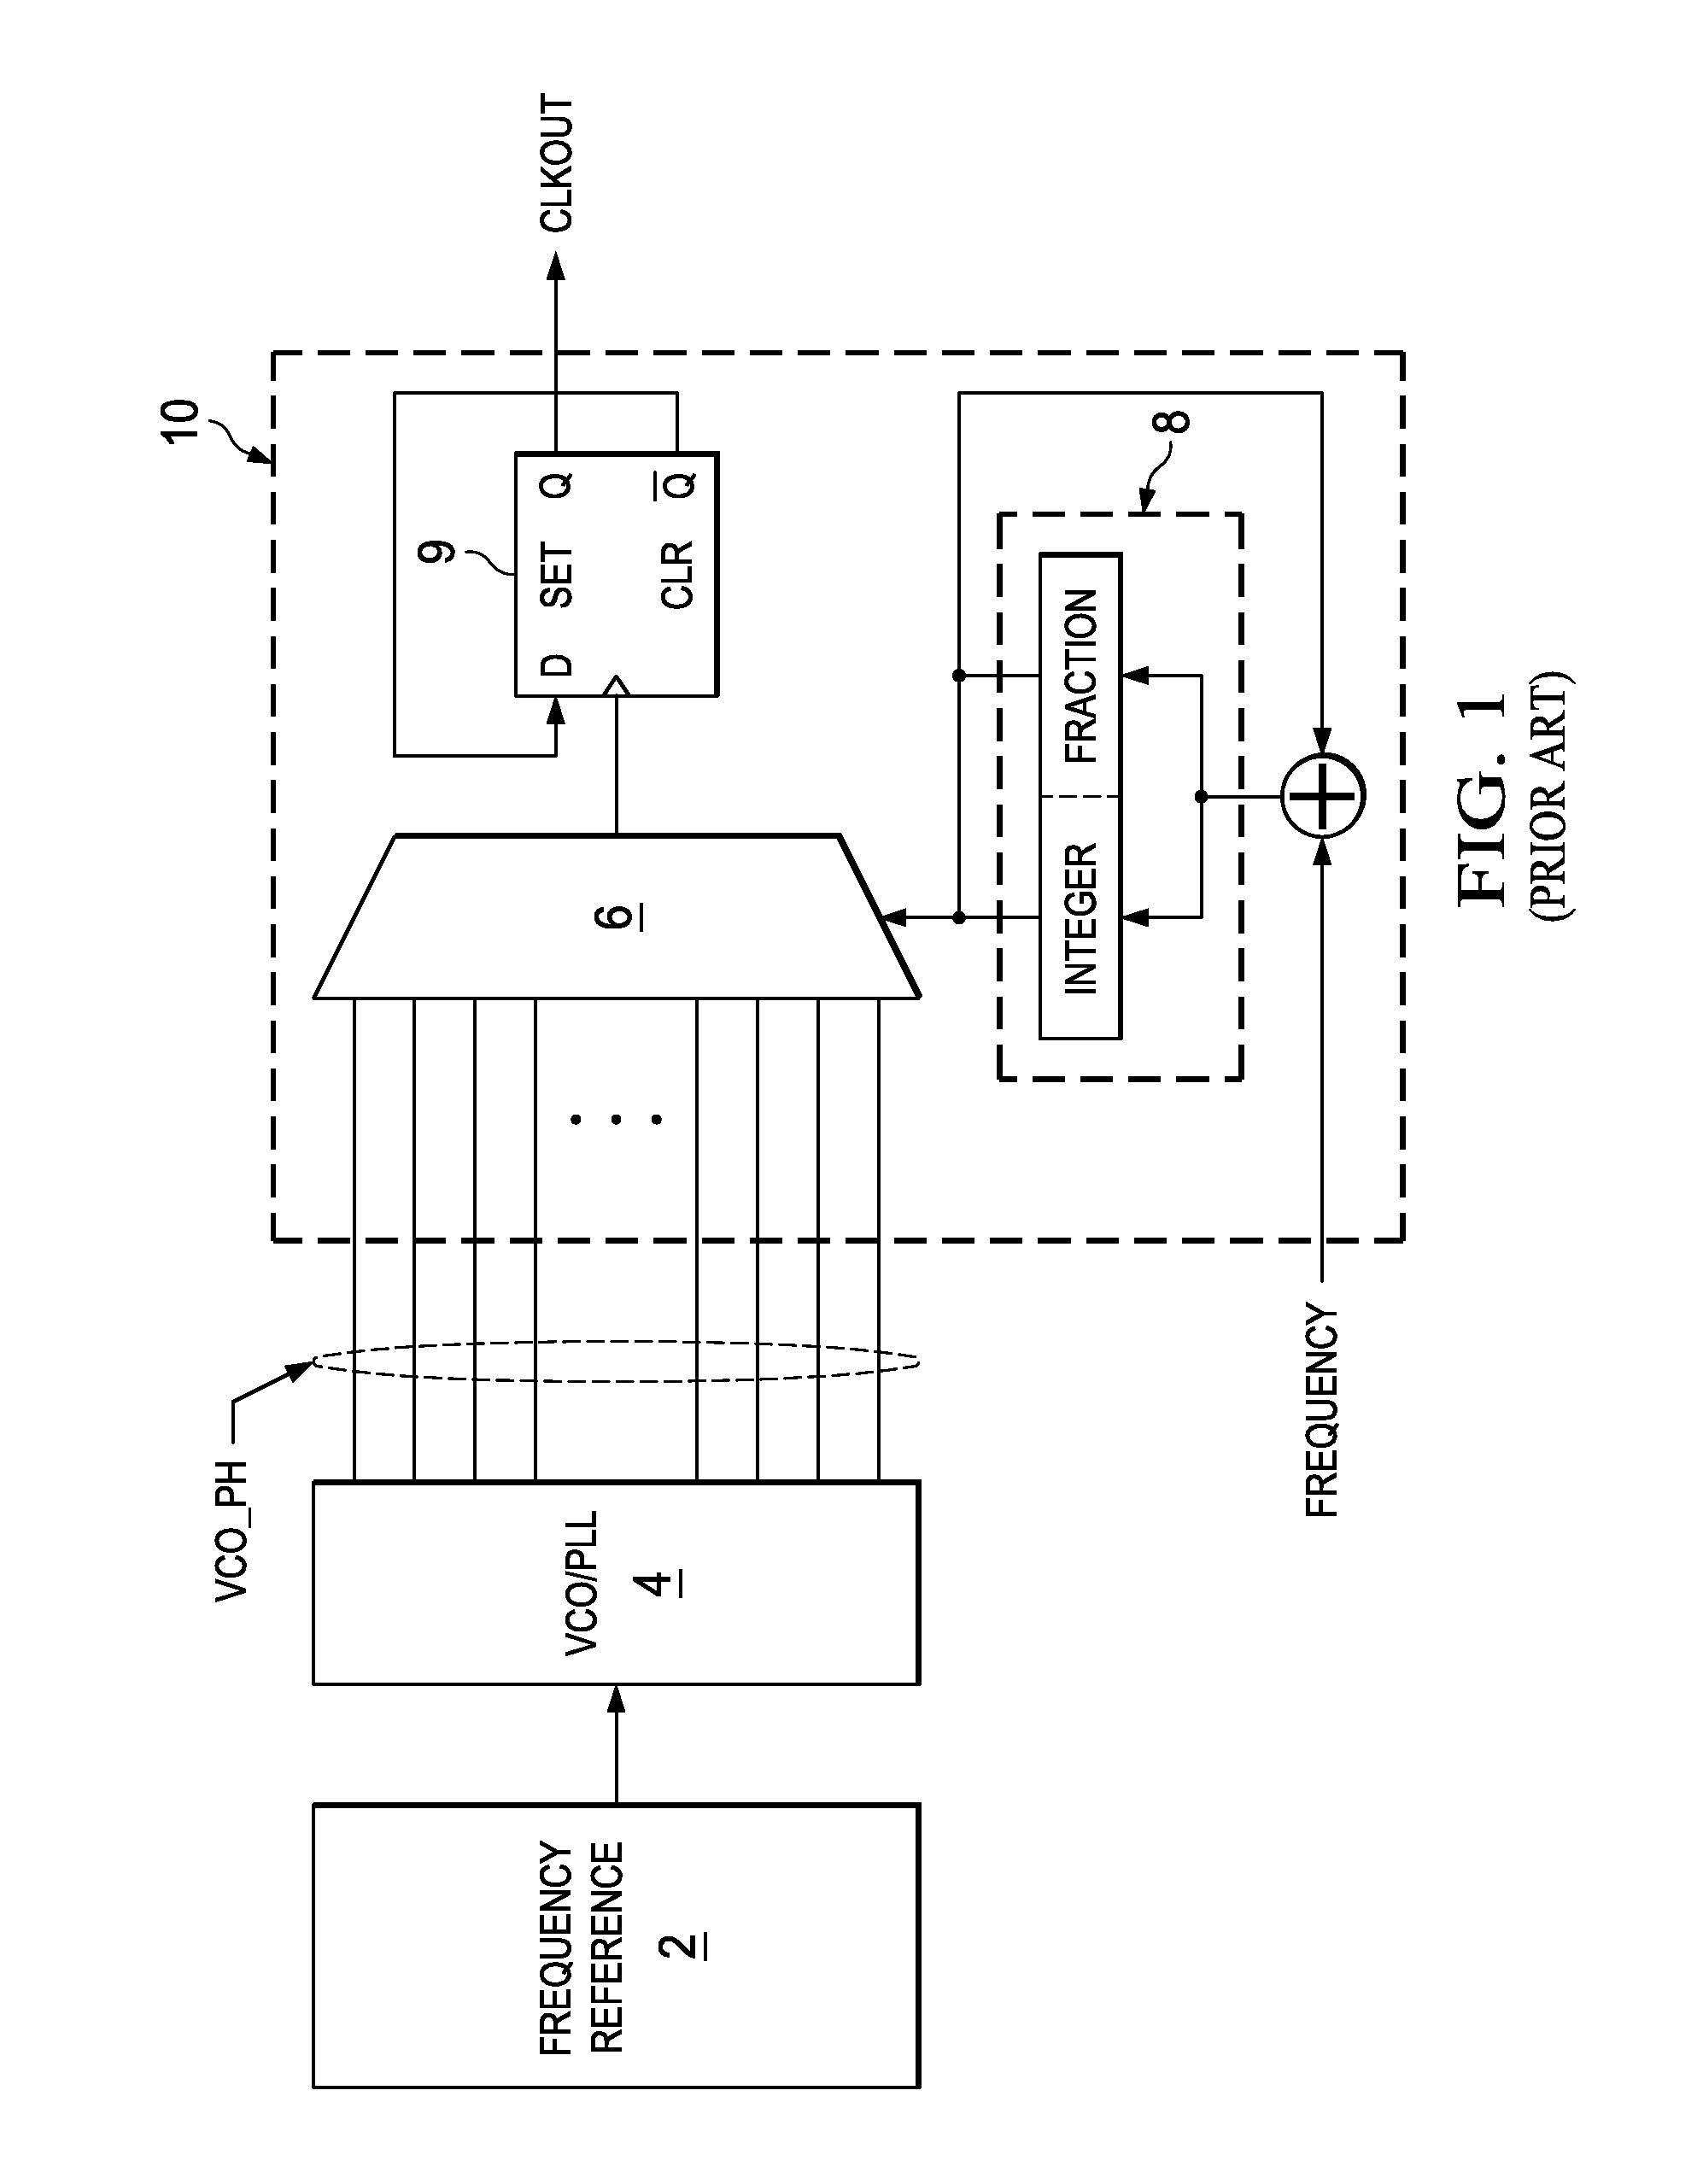 Jitter Precorrection Filter in Time-Average-Frequency Clocked Systems